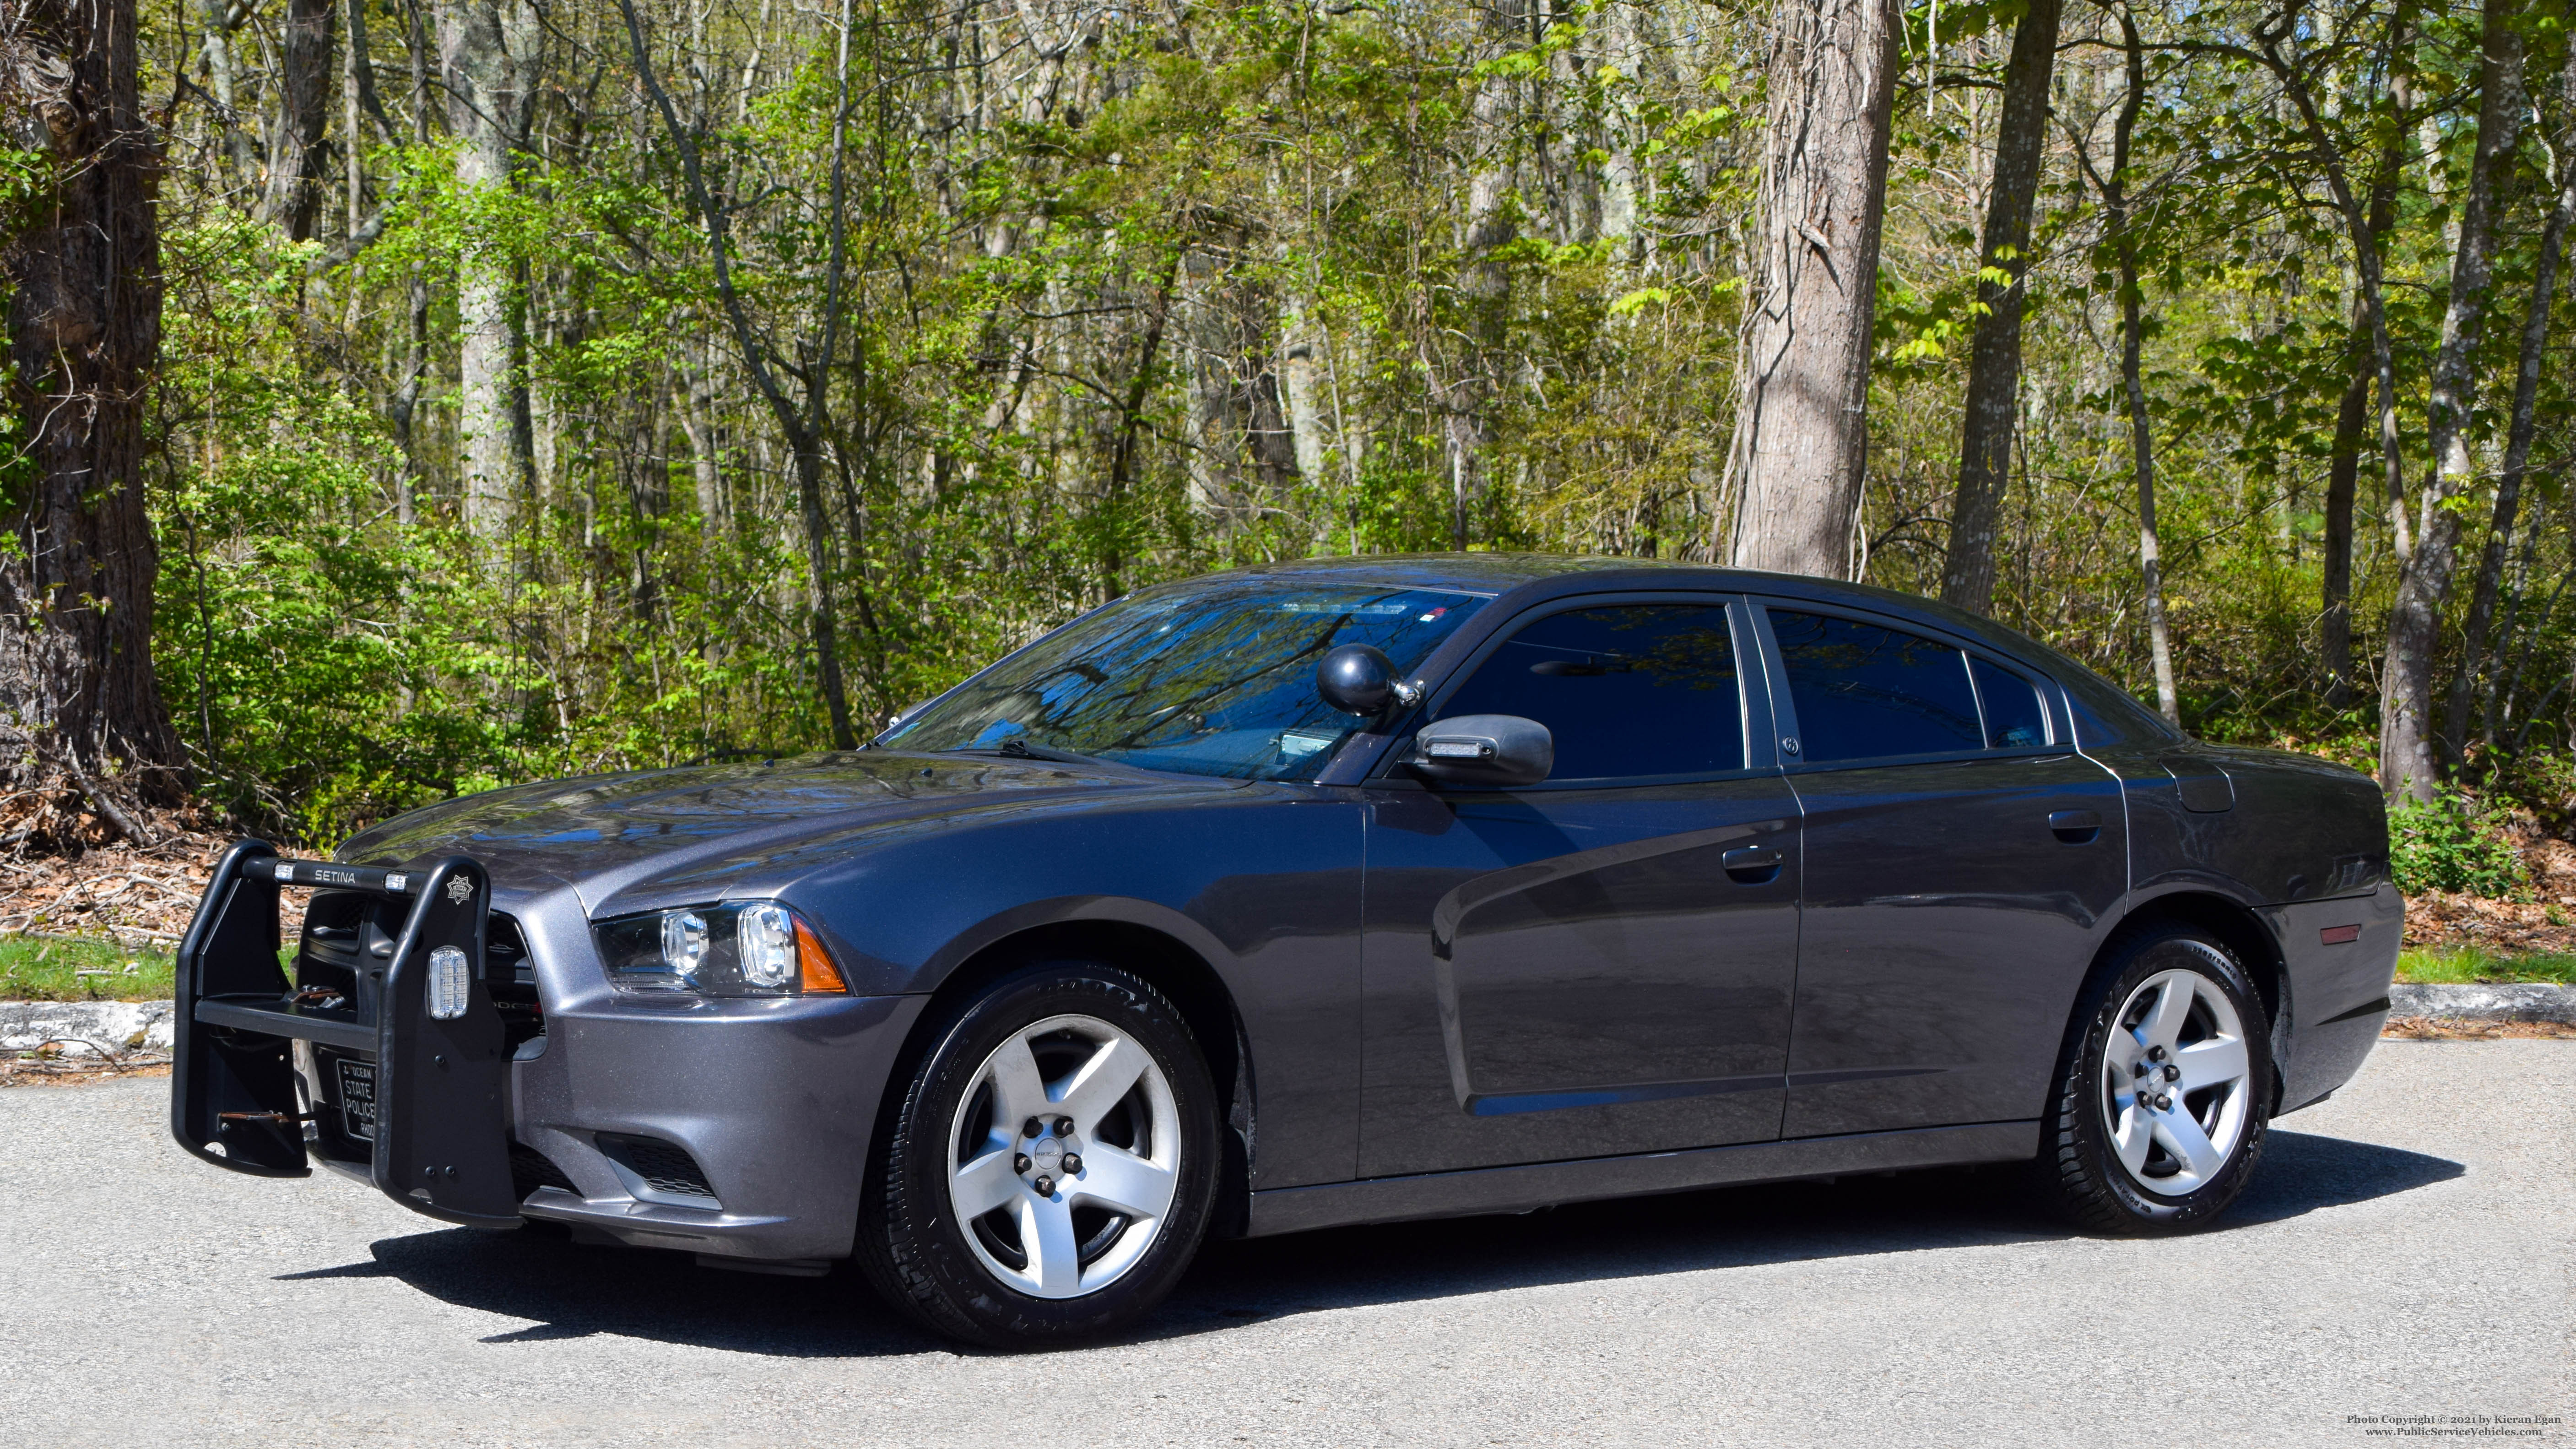 A photo  of Rhode Island State Police
            Cruiser 250, a 2013 Dodge Charger             taken by Kieran Egan